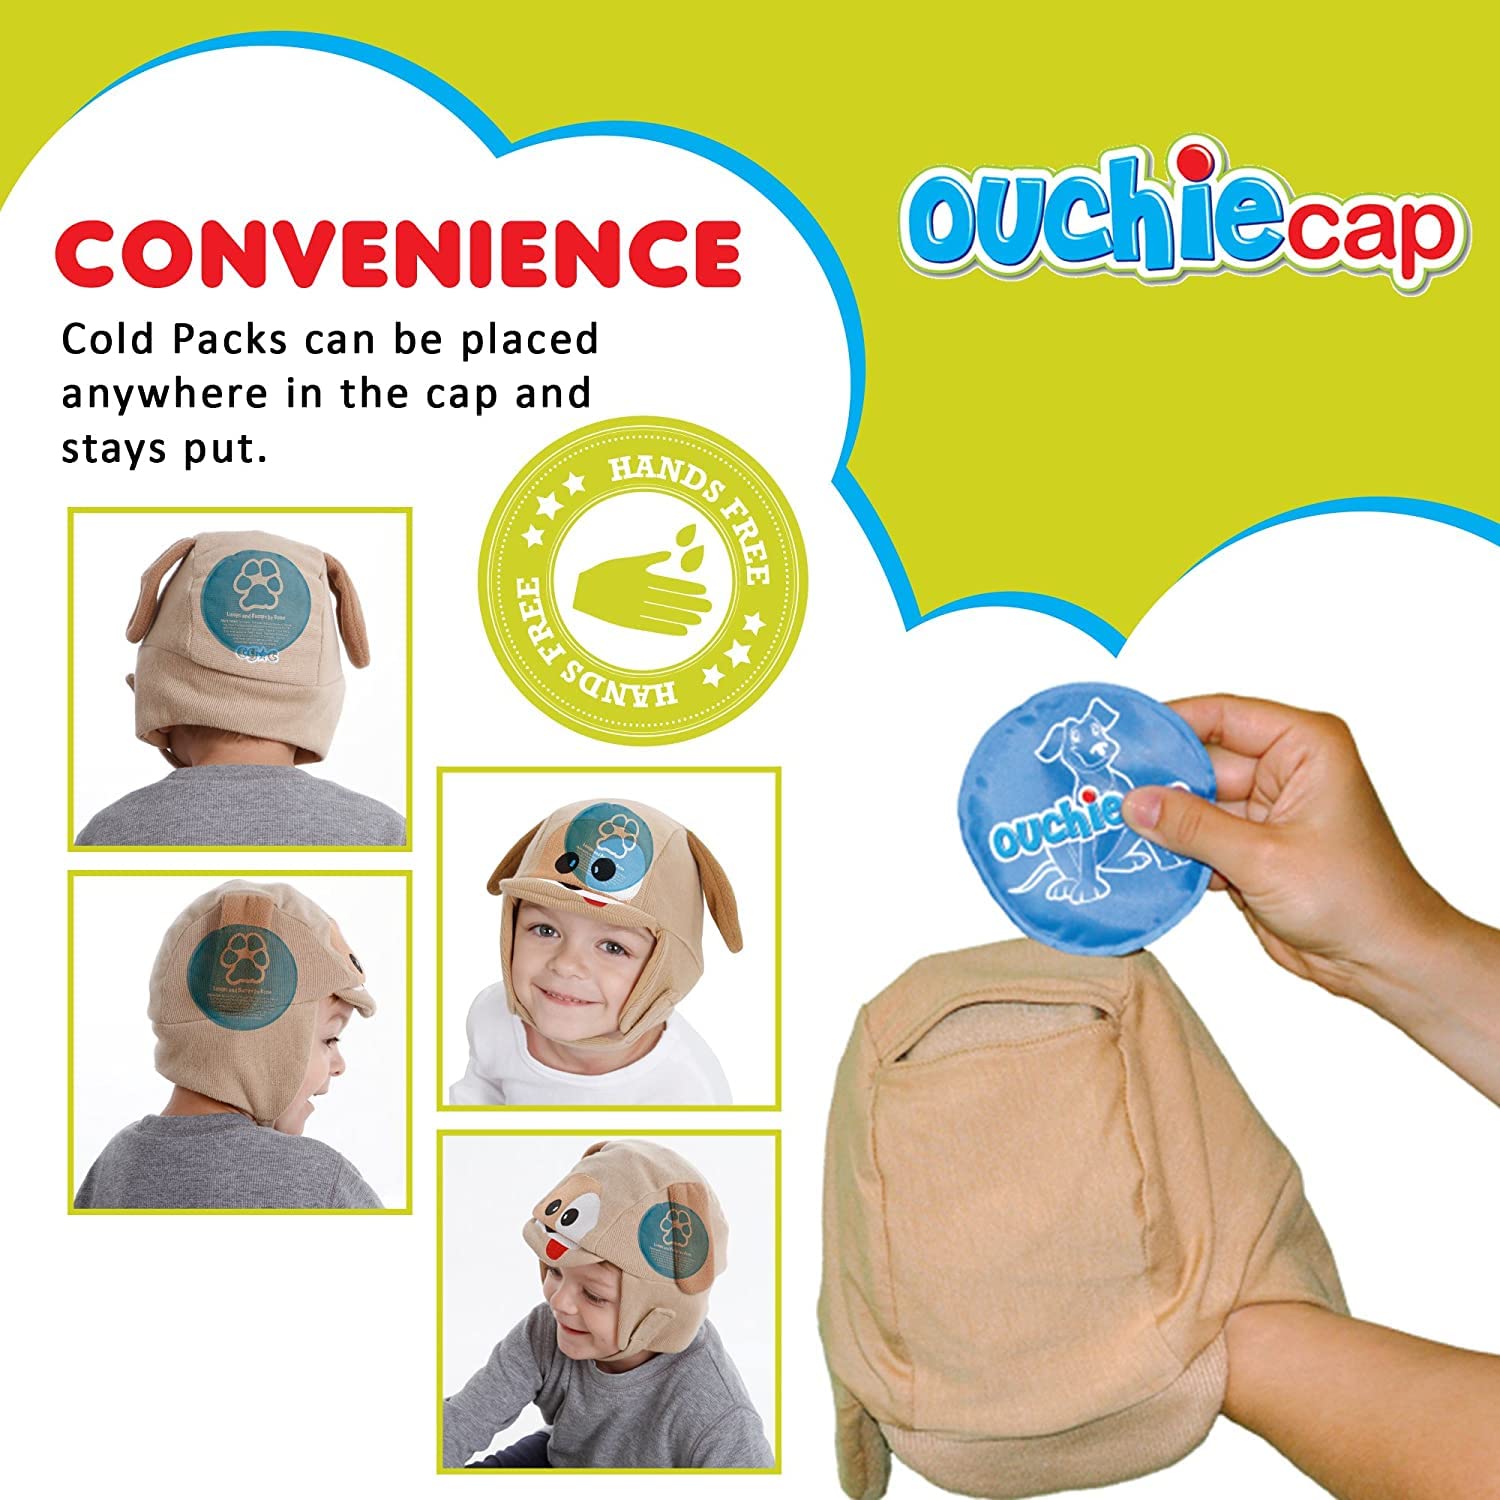 Ouchie cap is convenient to use! The cold or warm gel packs can be placed anywhere inside the cap and stay put.